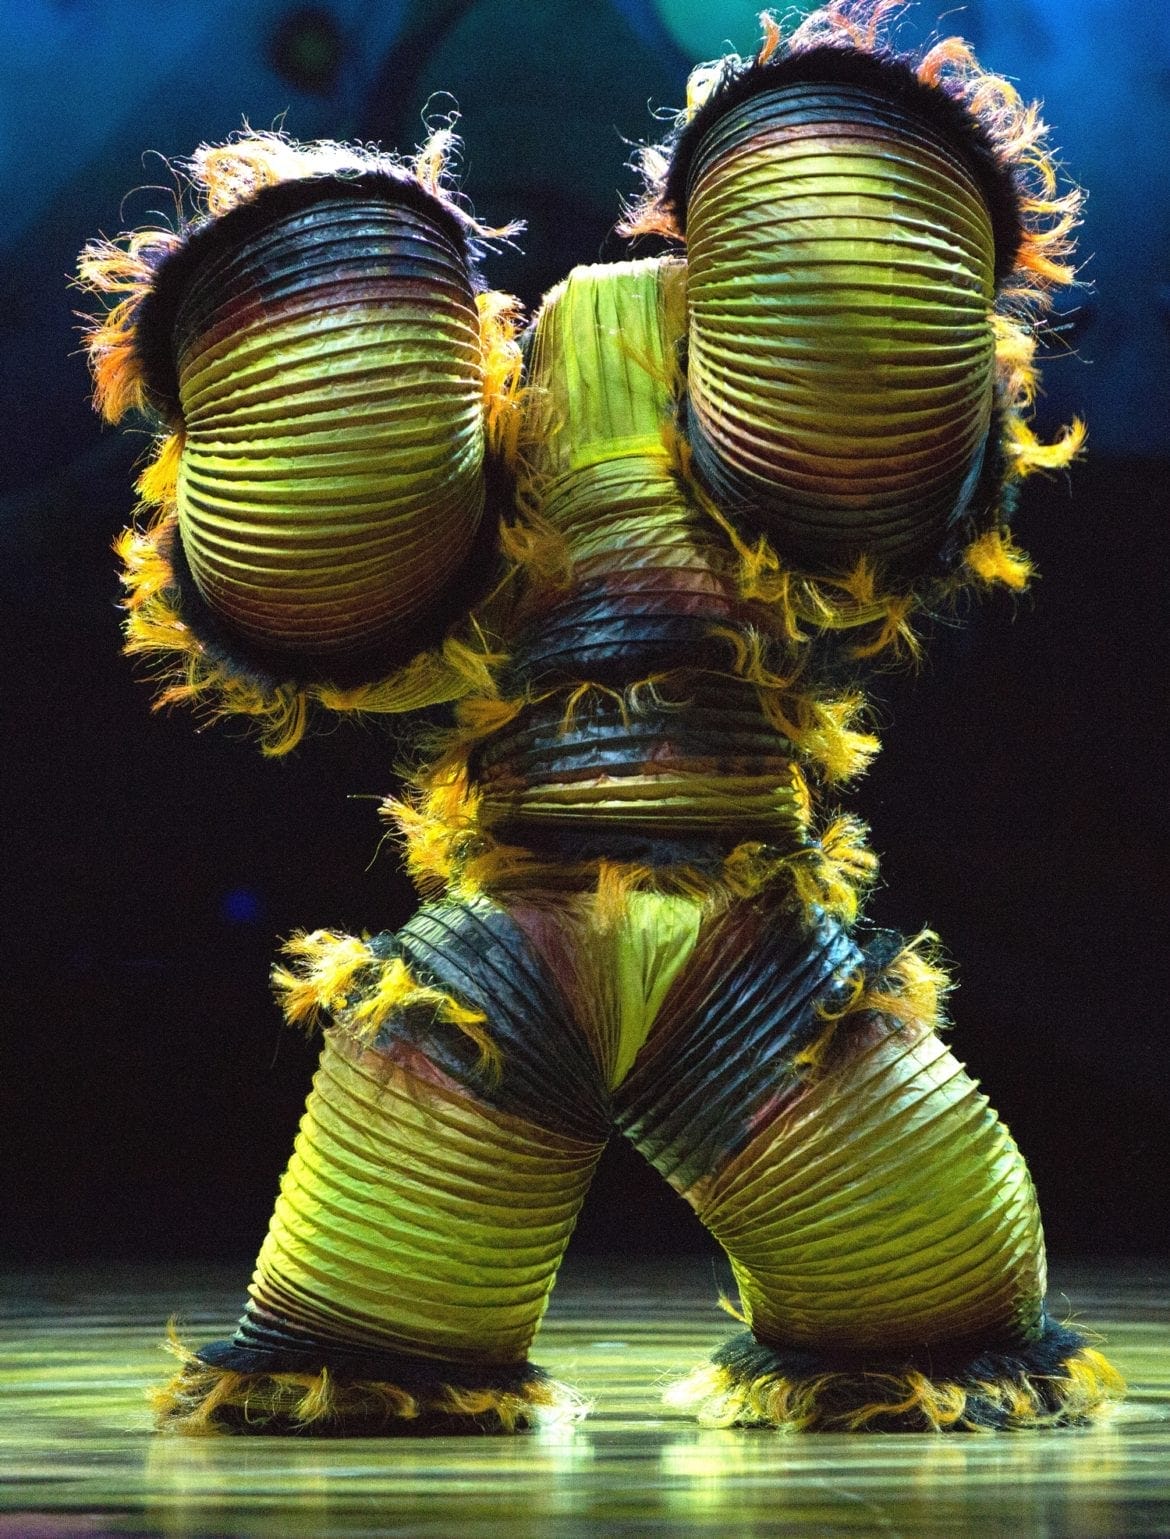 A Cirque du Soleil character on stage.